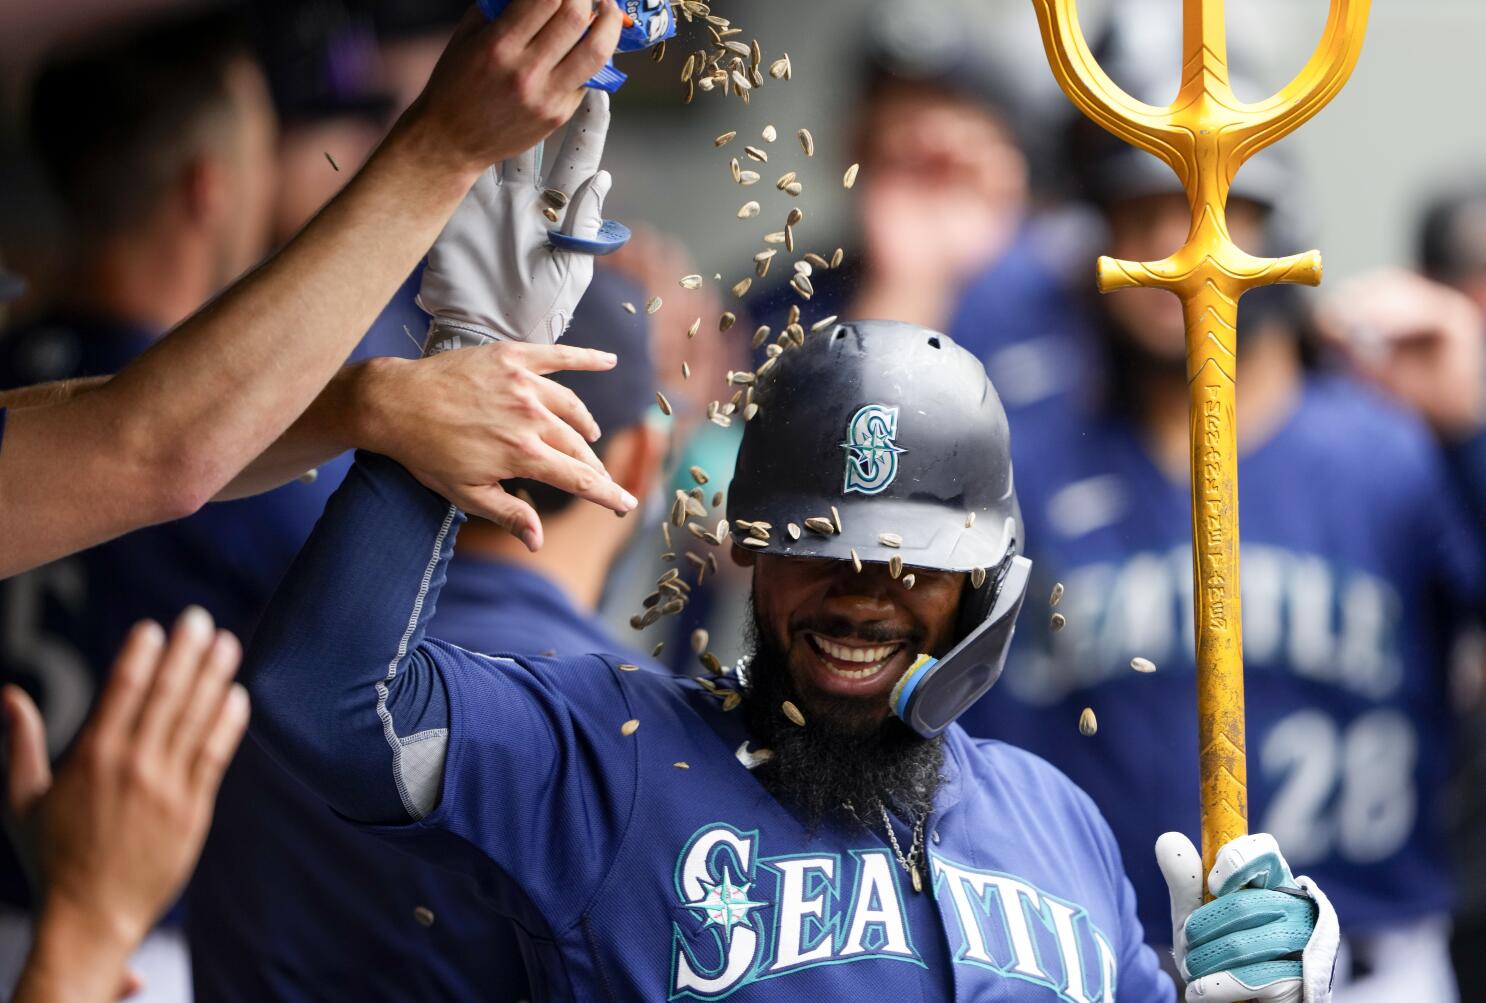 A Seattle Mariners fan's guide to picking the perfect jersey